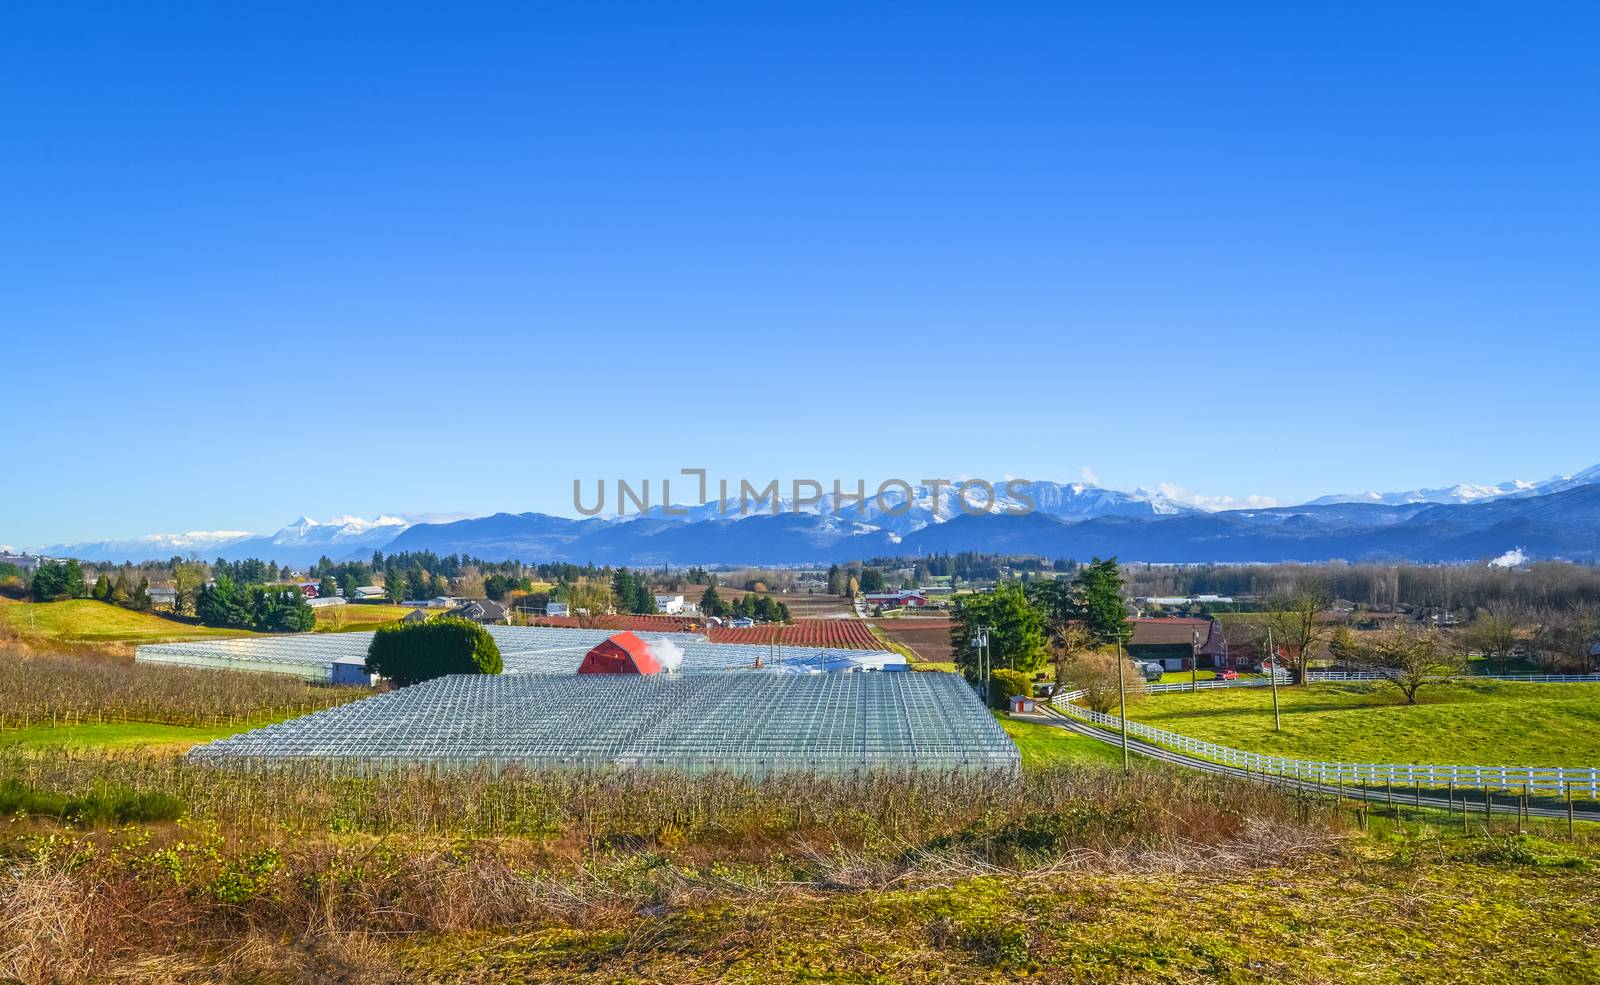 Winter season on fruit farm. Walley and mountains view on blue sky background by Imagenet